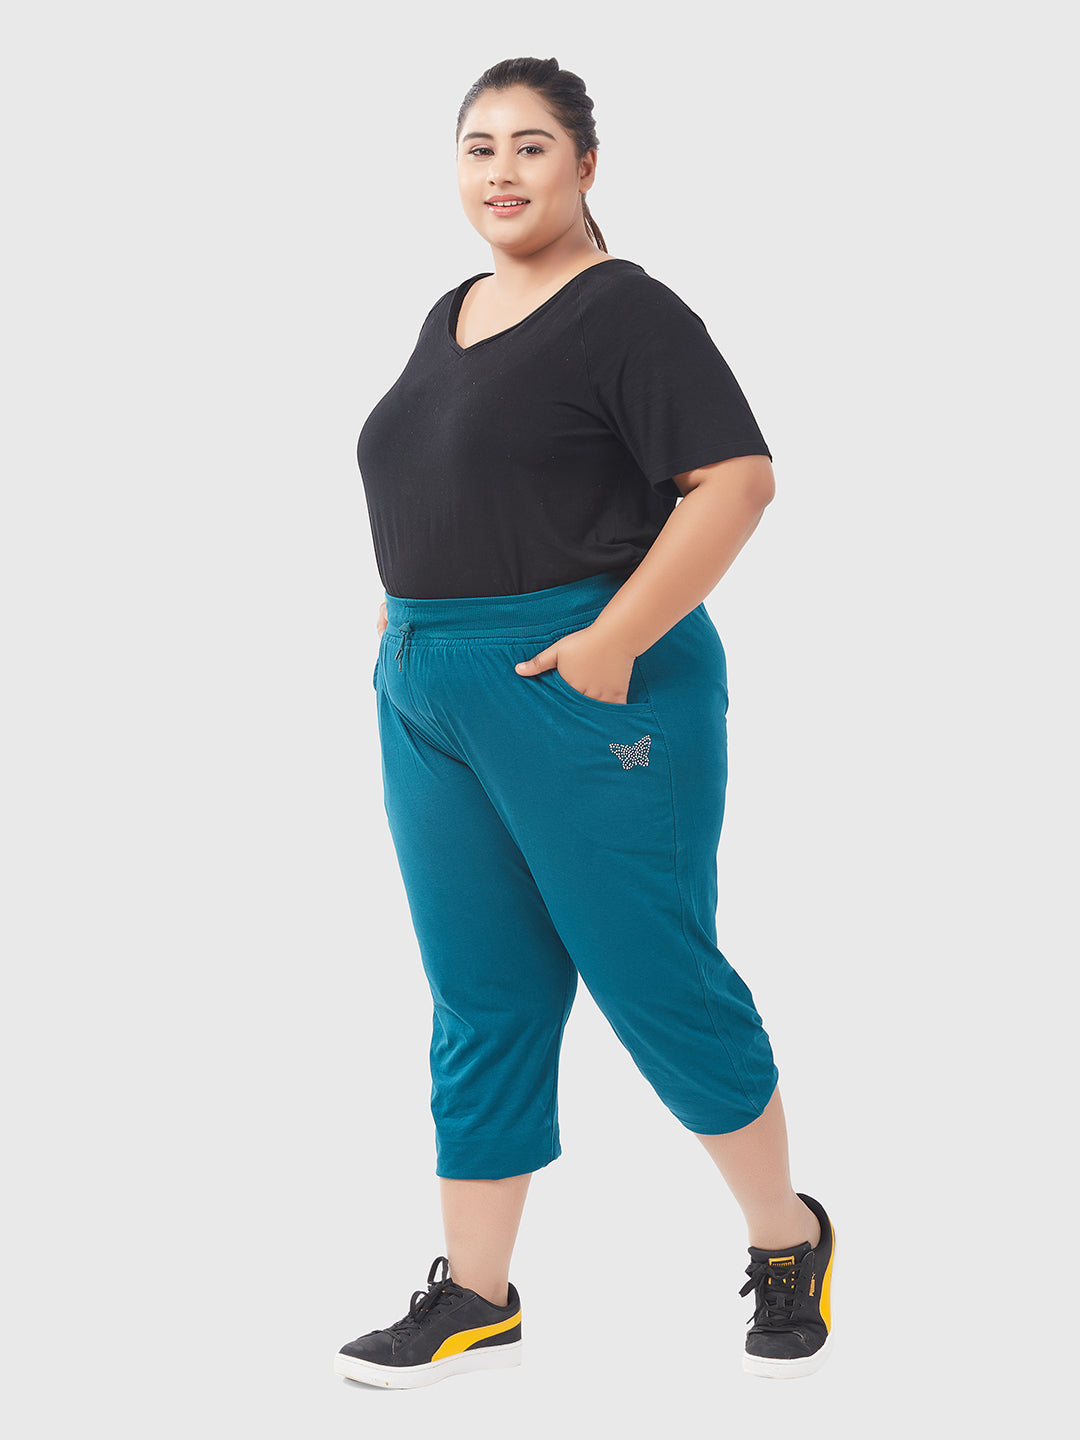 Buy Comfy Teal Blue Half Cotton Capri Pants For Women Online In India By  Cupidclothing's – Cupid Clothings